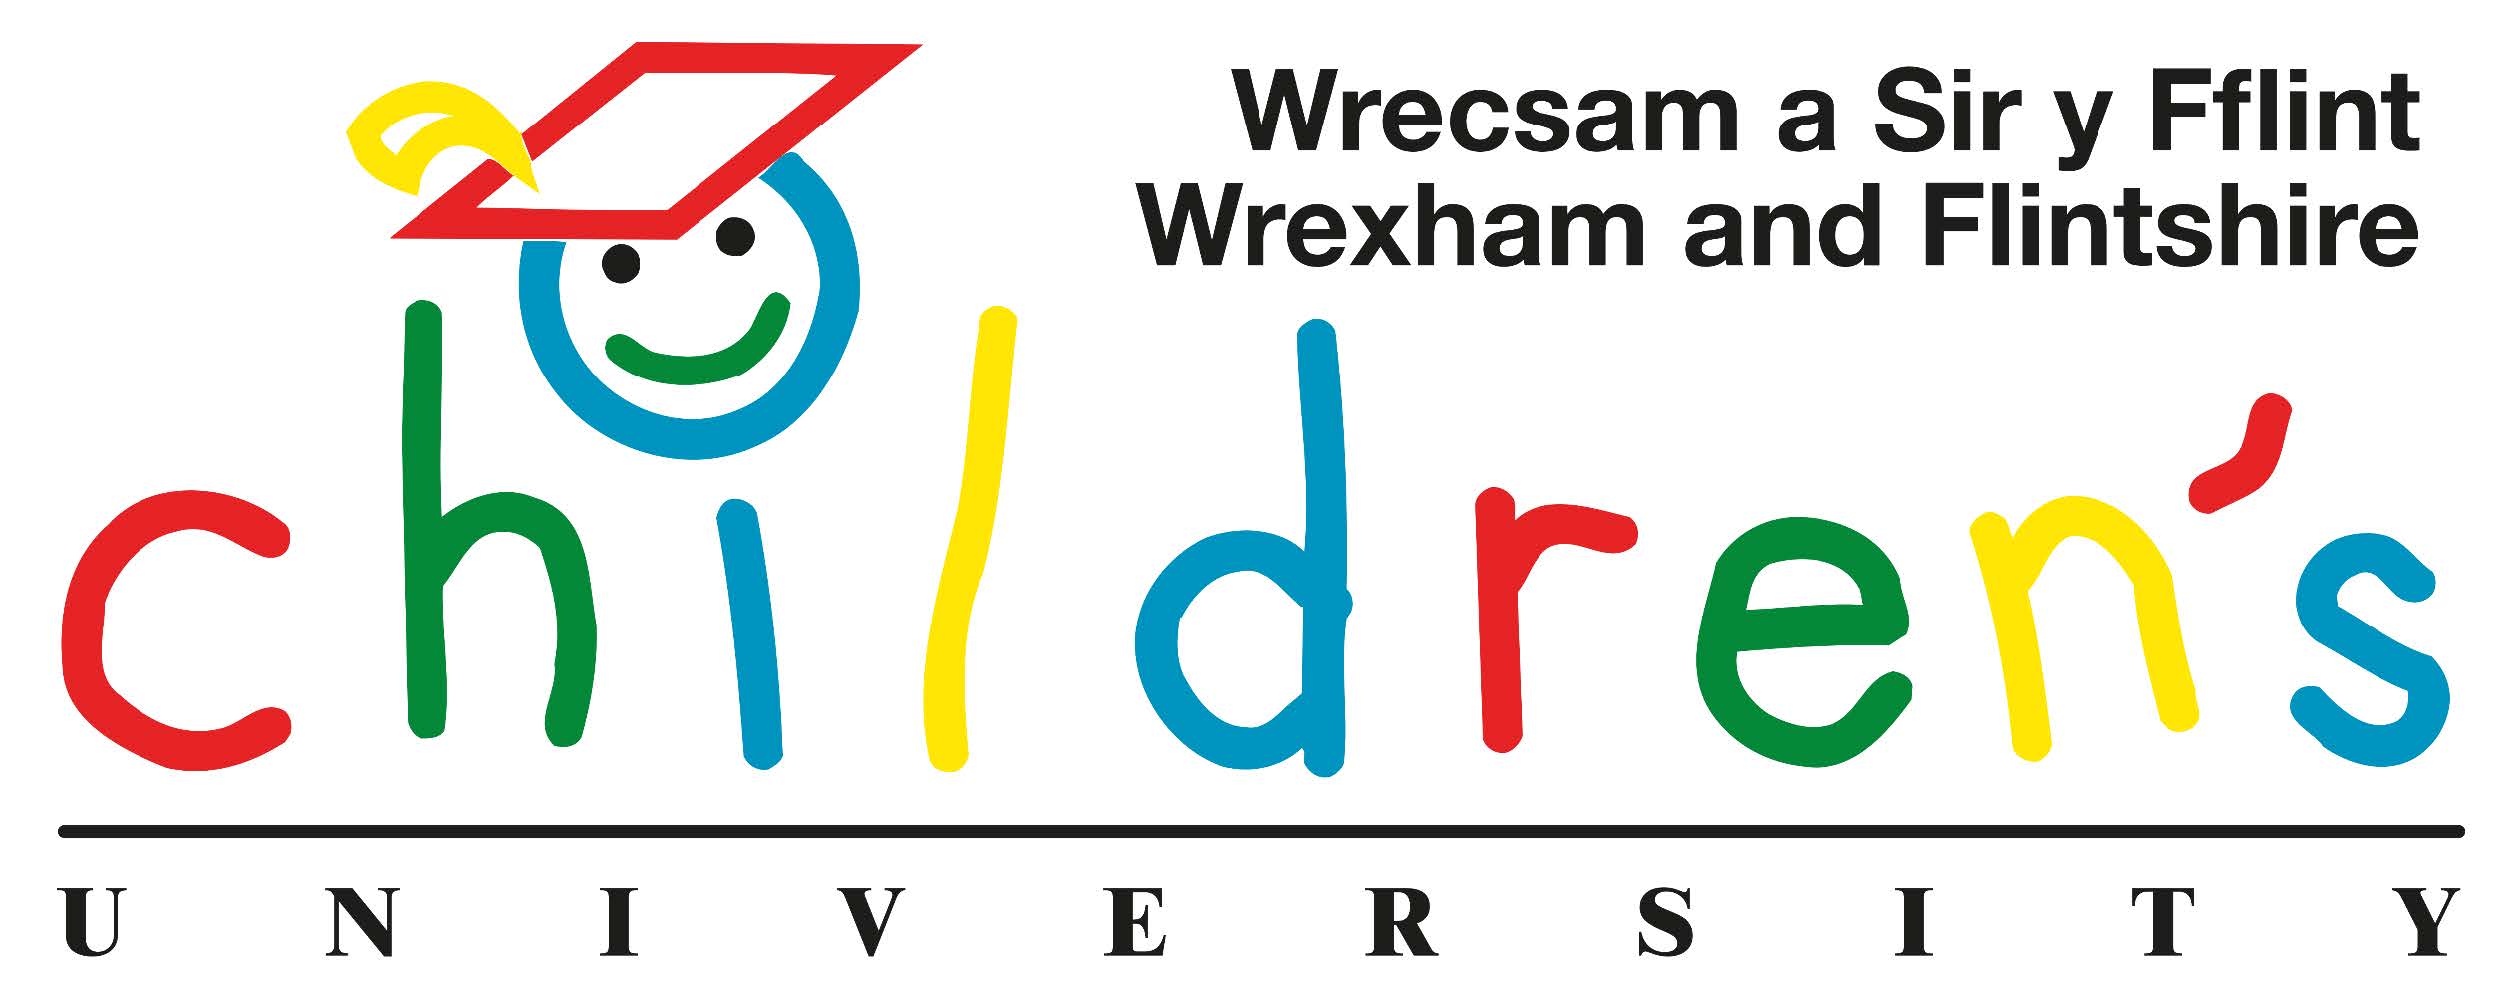 Logo for Wrexham and Flintshire / Wrecsam a Sir Y Fflint Children's University with smiley face